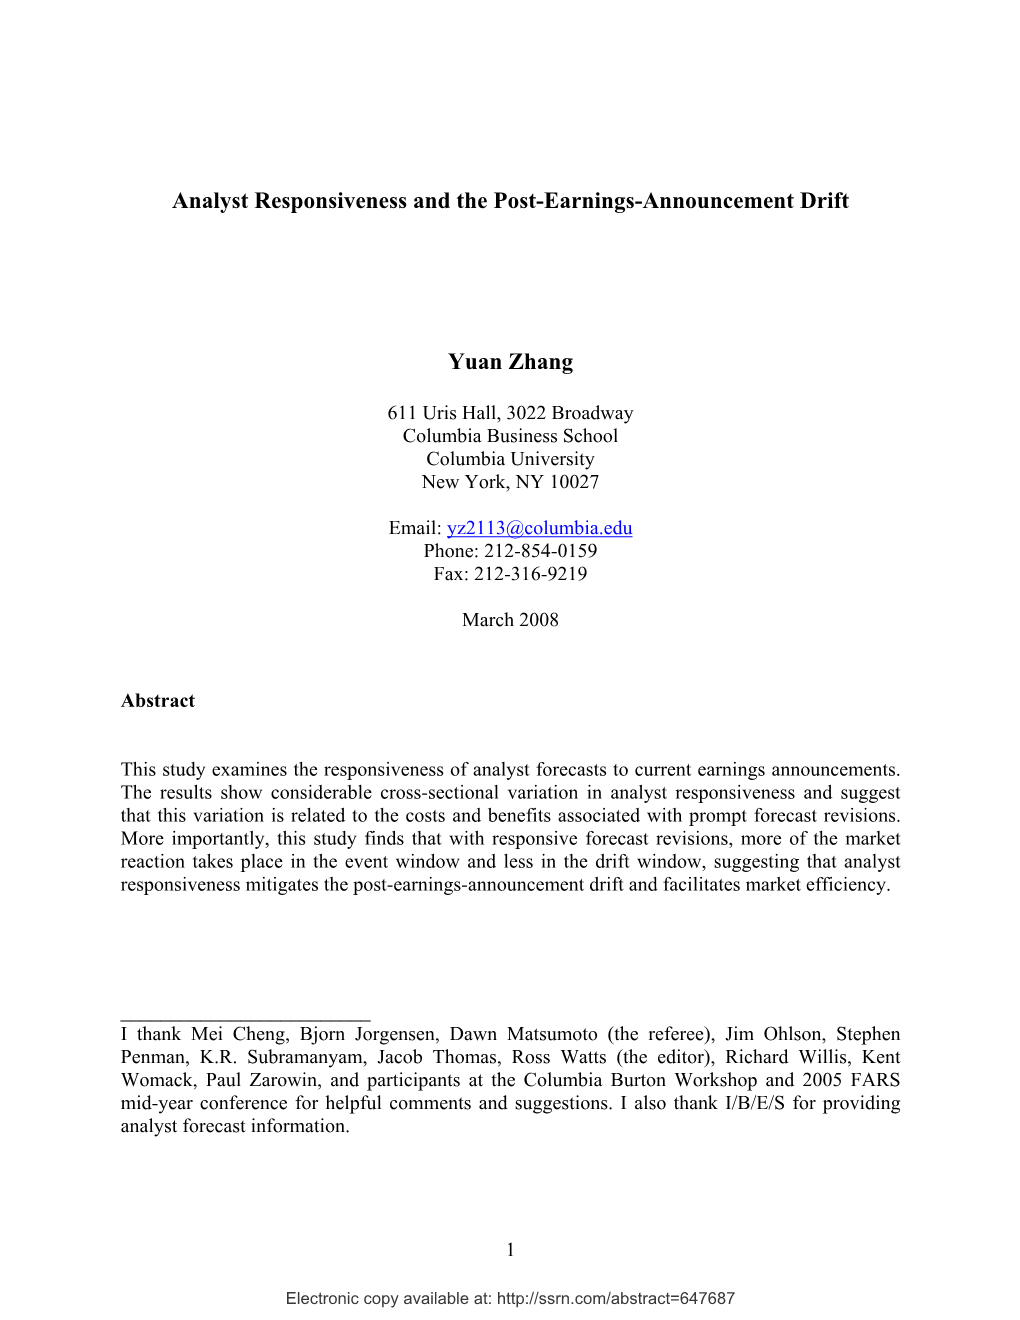 Analyst Responsiveness and the Post-Earnings-Announcement Drift